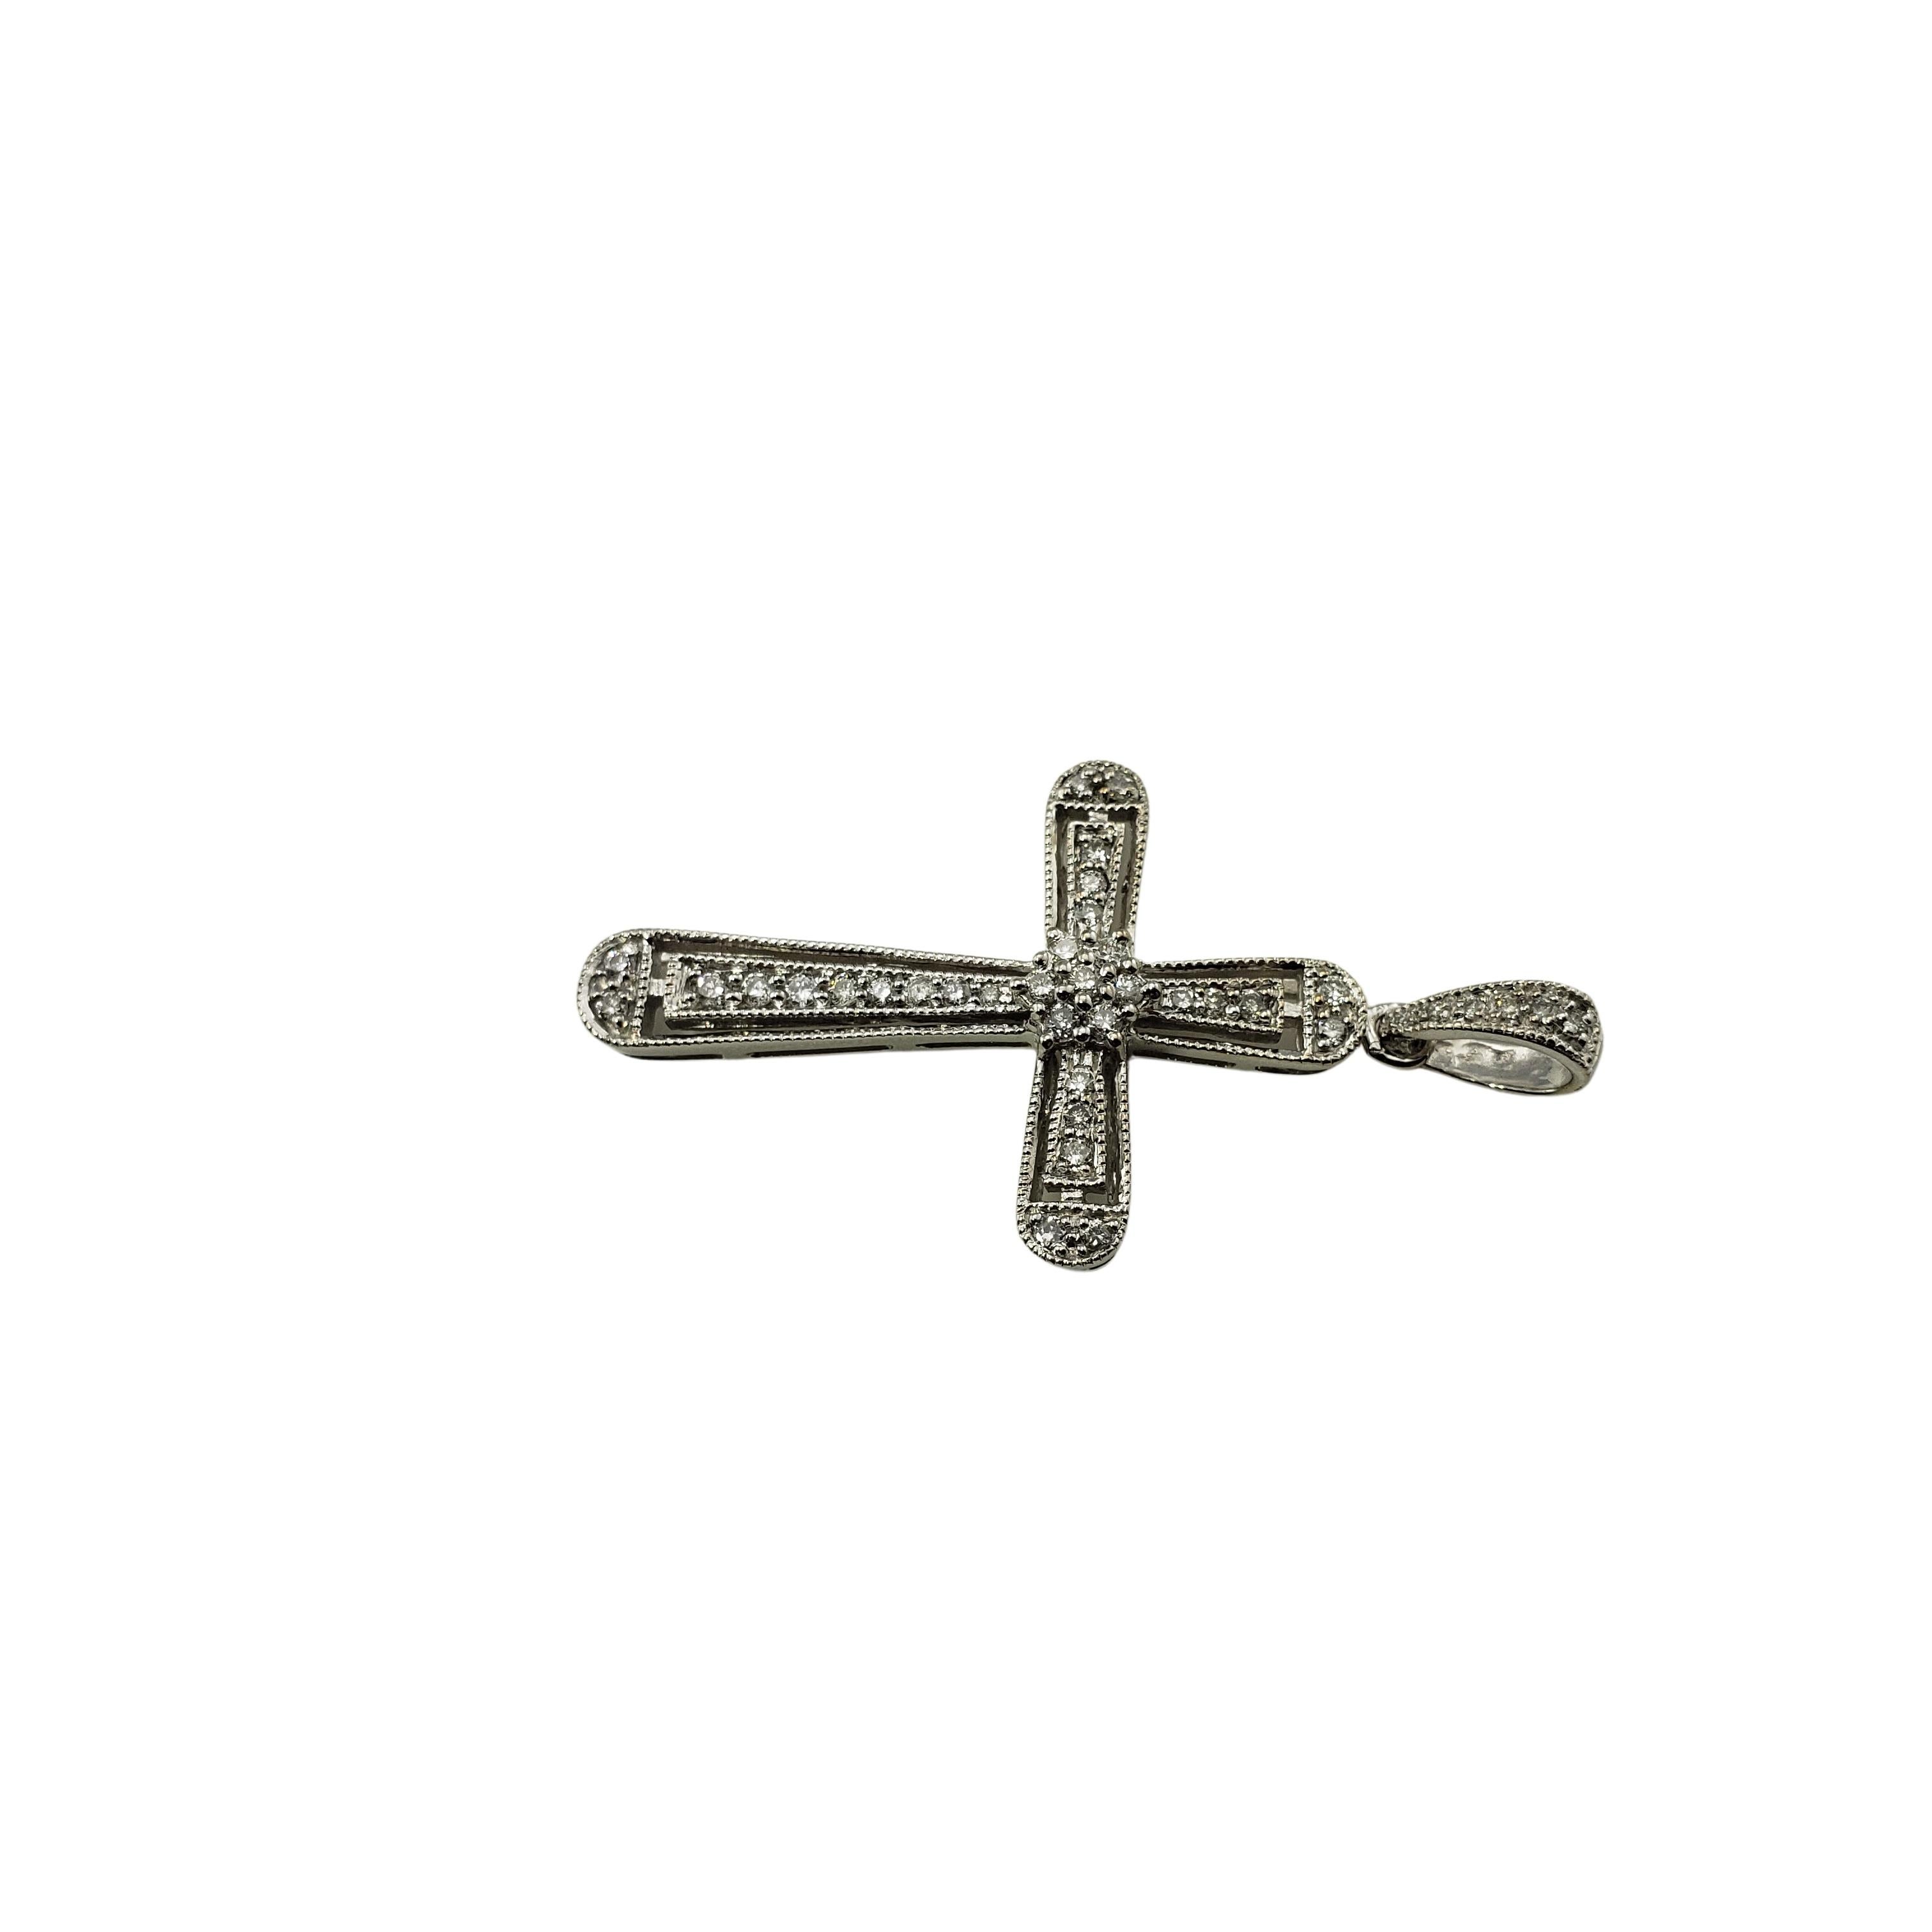 Vintage 14 Karat White Gold and Diamond Cross Pendant-

This sparkling cross pendant features 38 round brilliant cut diamonds set in classic 14K white gold.

Approximate total diamond weight:  .20 ct.

Diamond color:  G-H

Diamond clarity: 